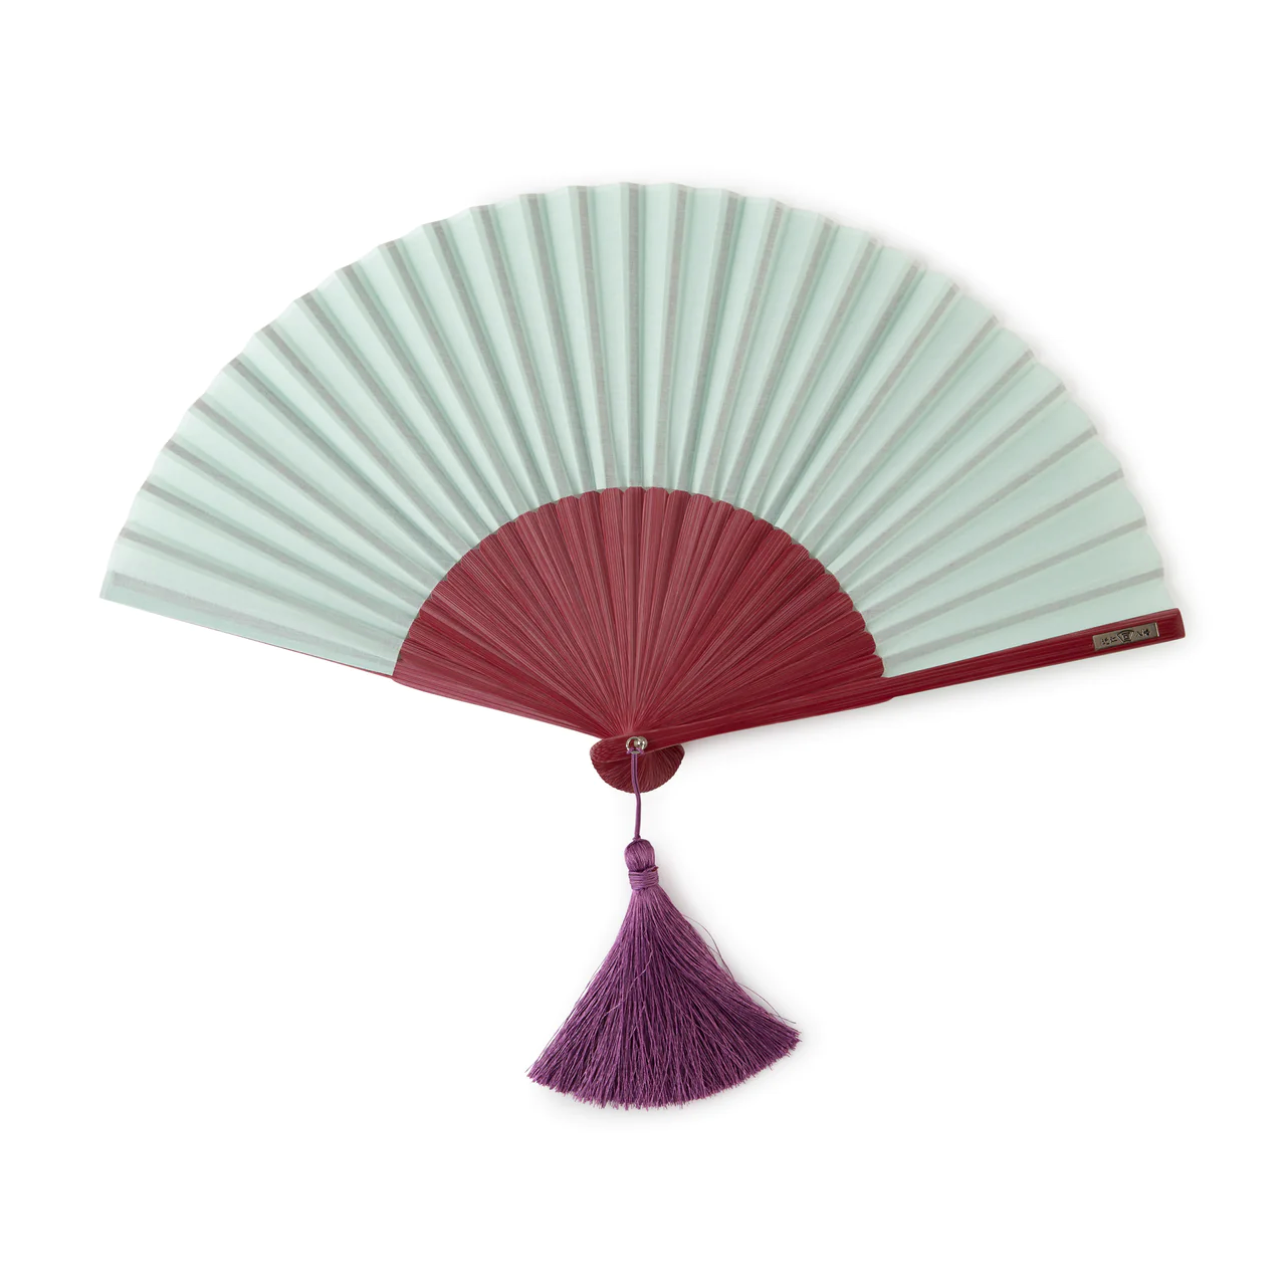 Best Stylish Hand Fans to Stay Cool - The New York Times